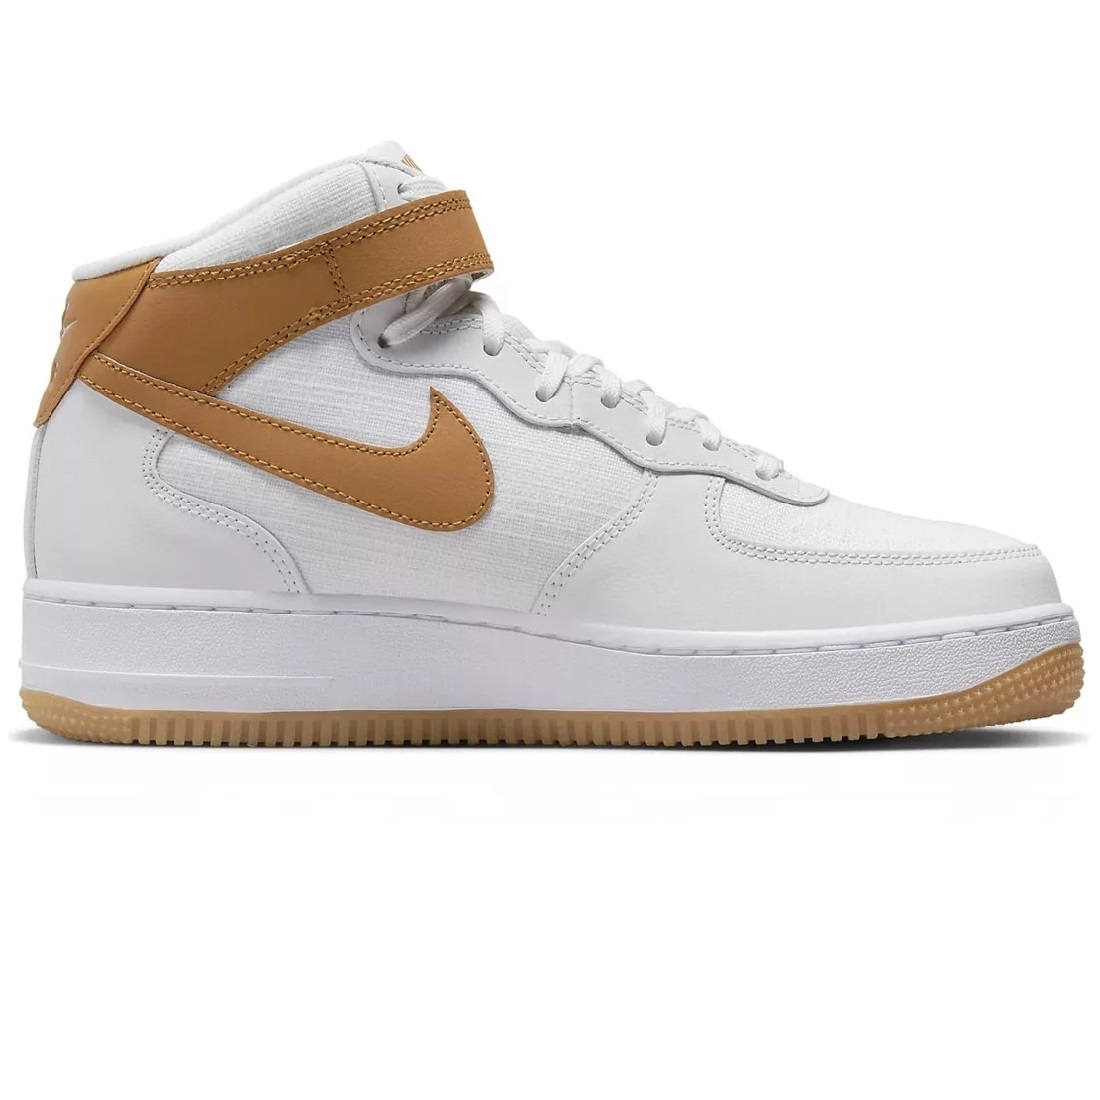 *NIKE WMNS AIR FORCE 1 MID \'07 white / light brown chewing gum sole 24.0cm Nike wi men's Air Force 1 mid 07 DD9625-102